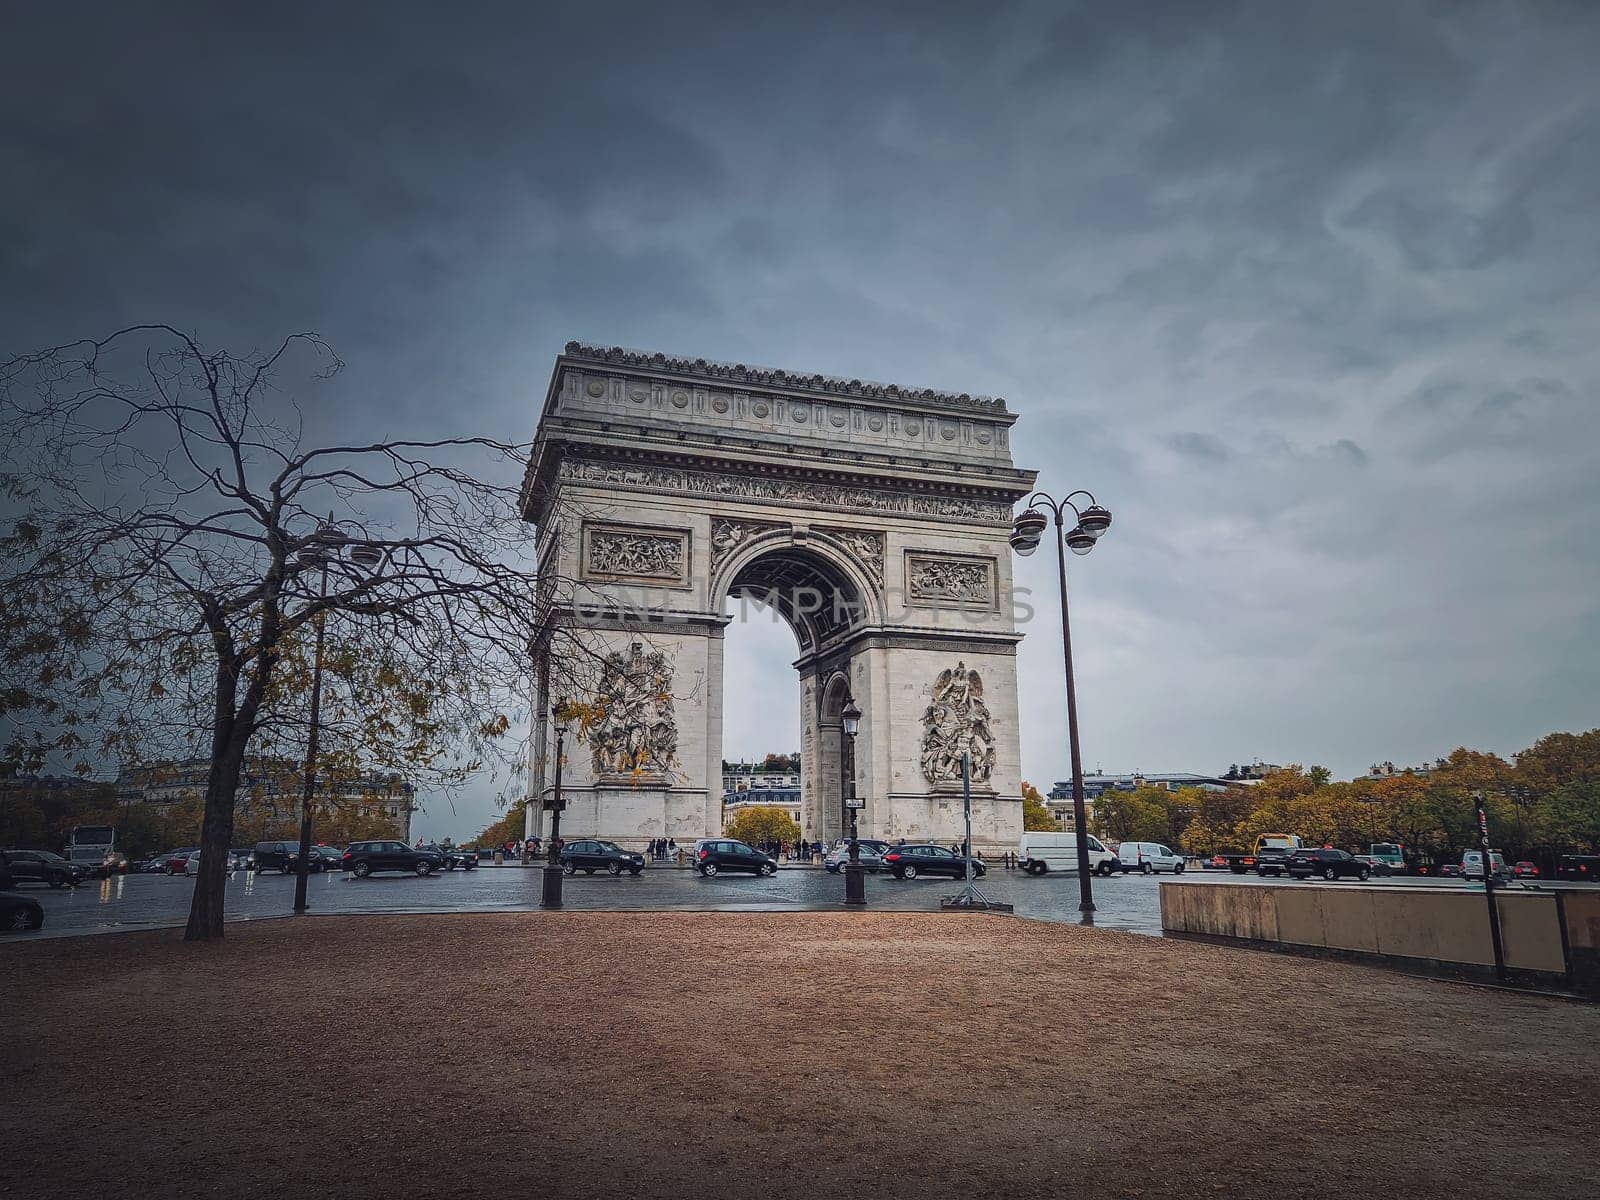 Arc de triomphe in Paris, France. Rainy autumn day with a romantic view to the triumphal arch landmark from avenue by psychoshadow